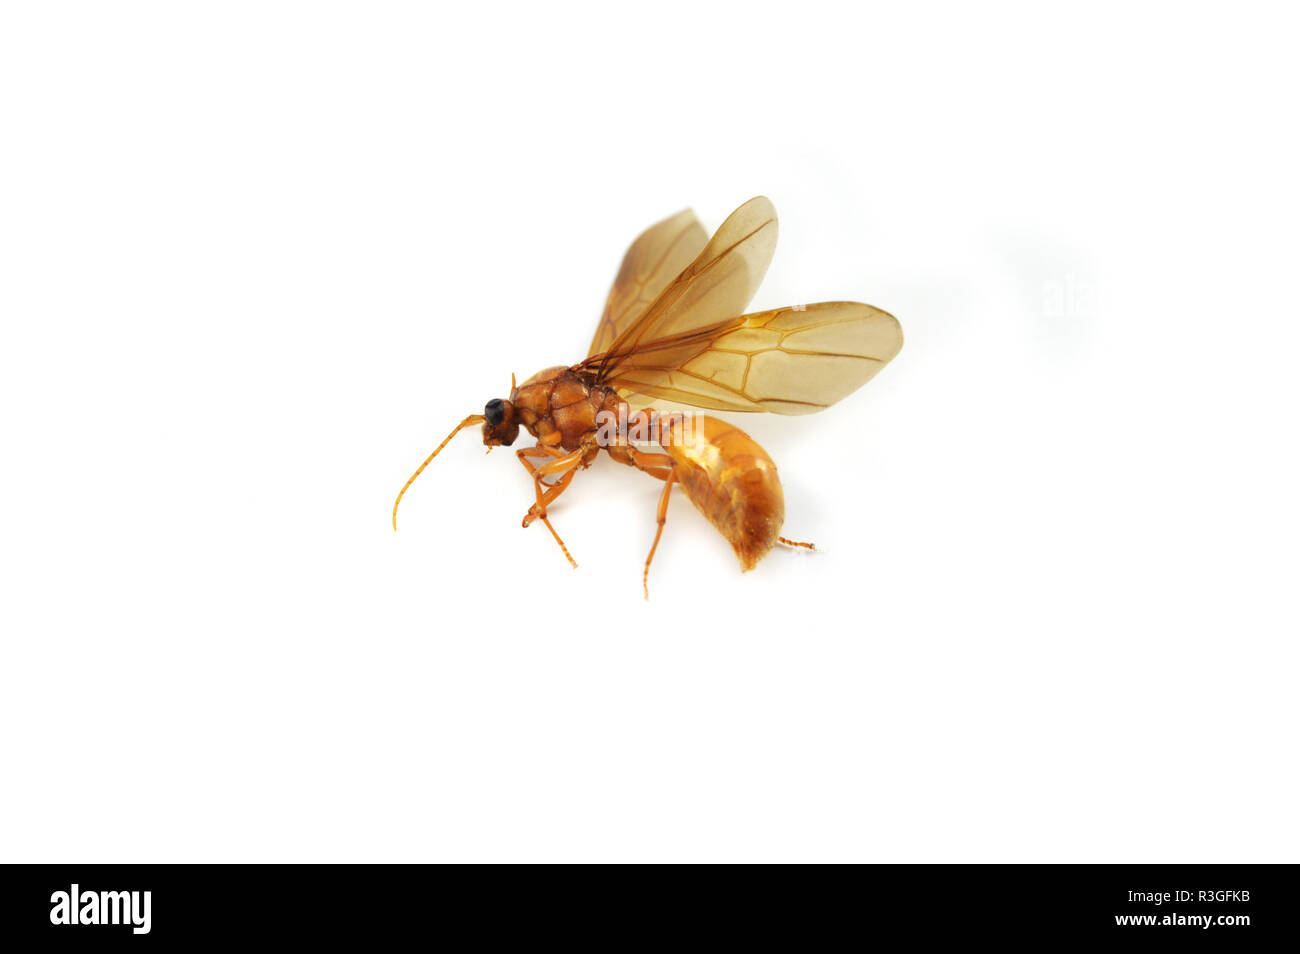 subterranean ants isolated / Golden subterranean insects horsefly isolated on white background / Dead insect in ants family - beautiful wing insects Stock Photo